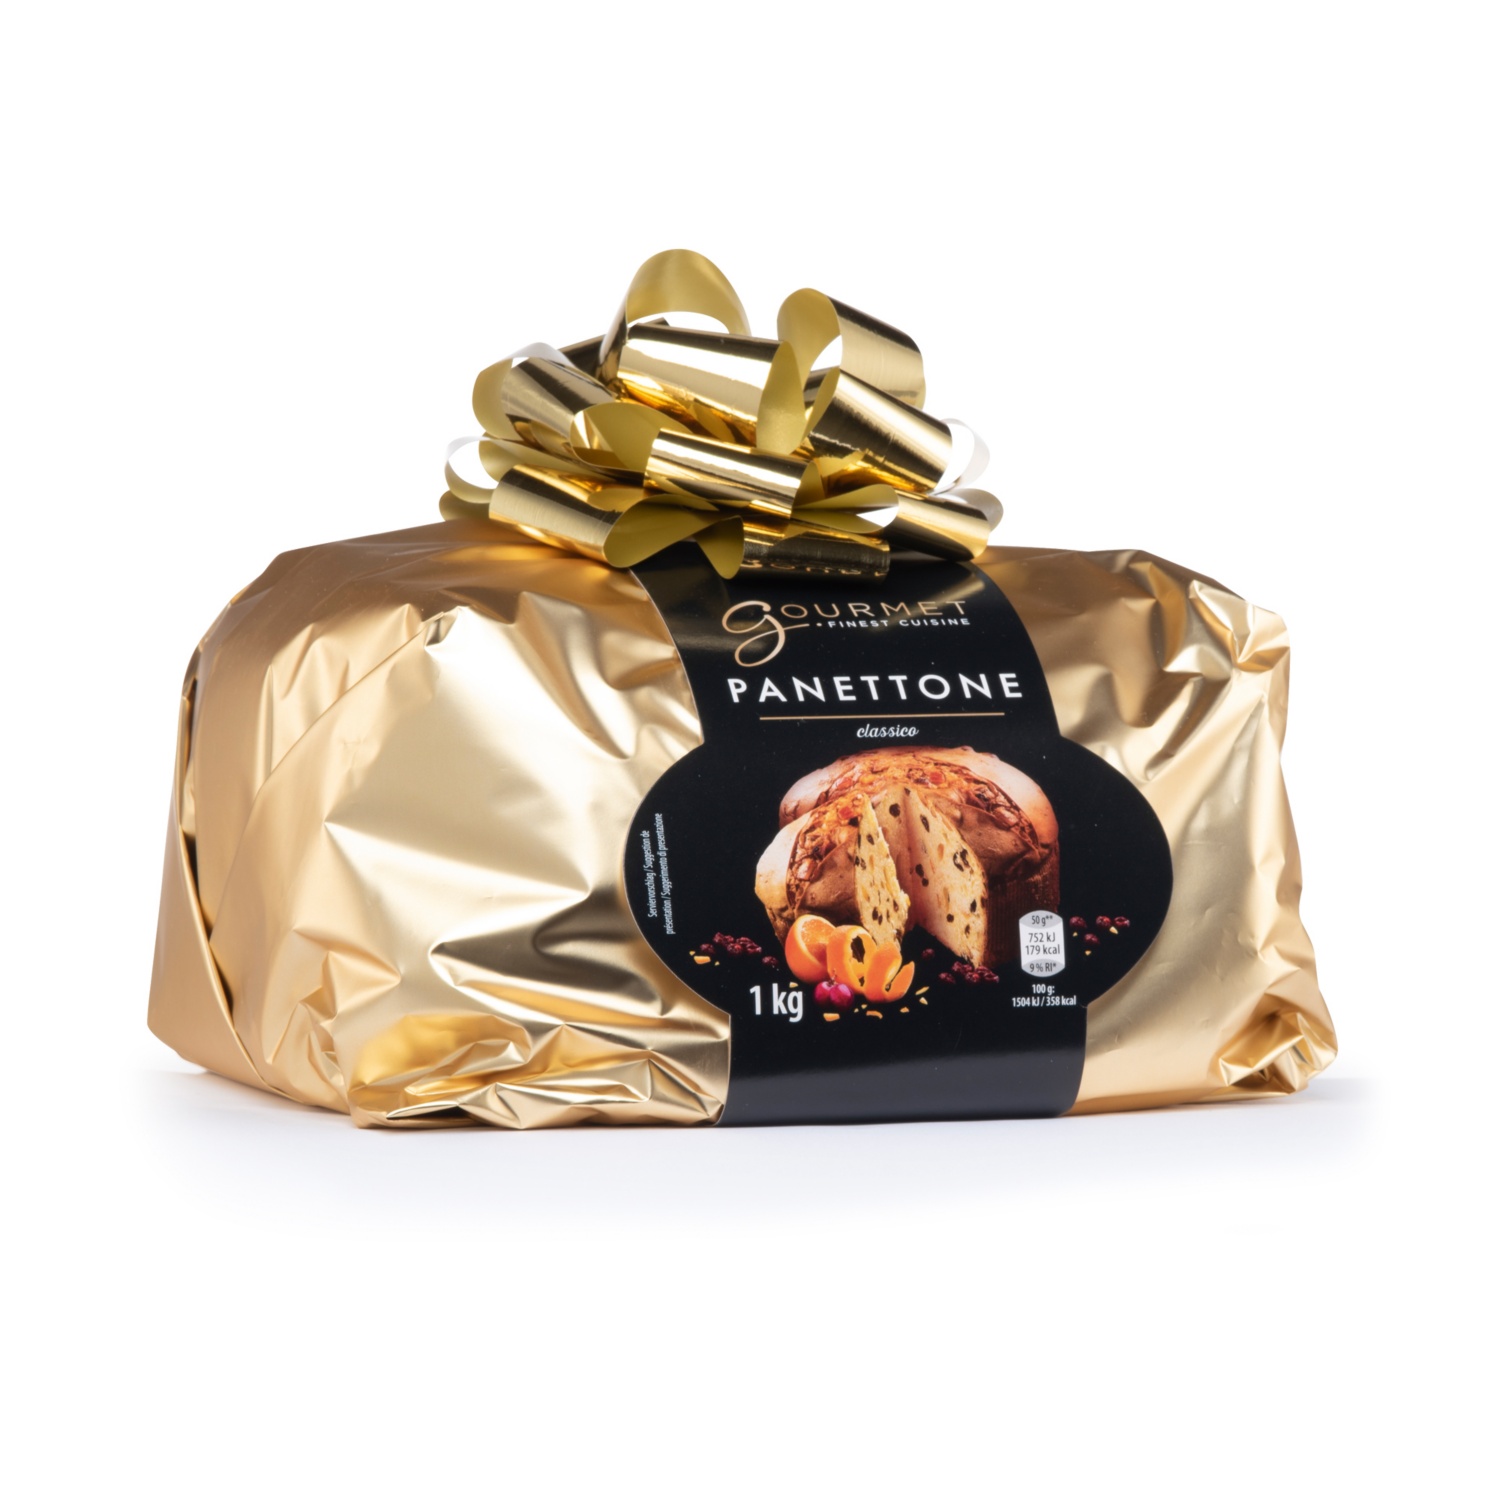 GOURMET Handwrapped Panettone